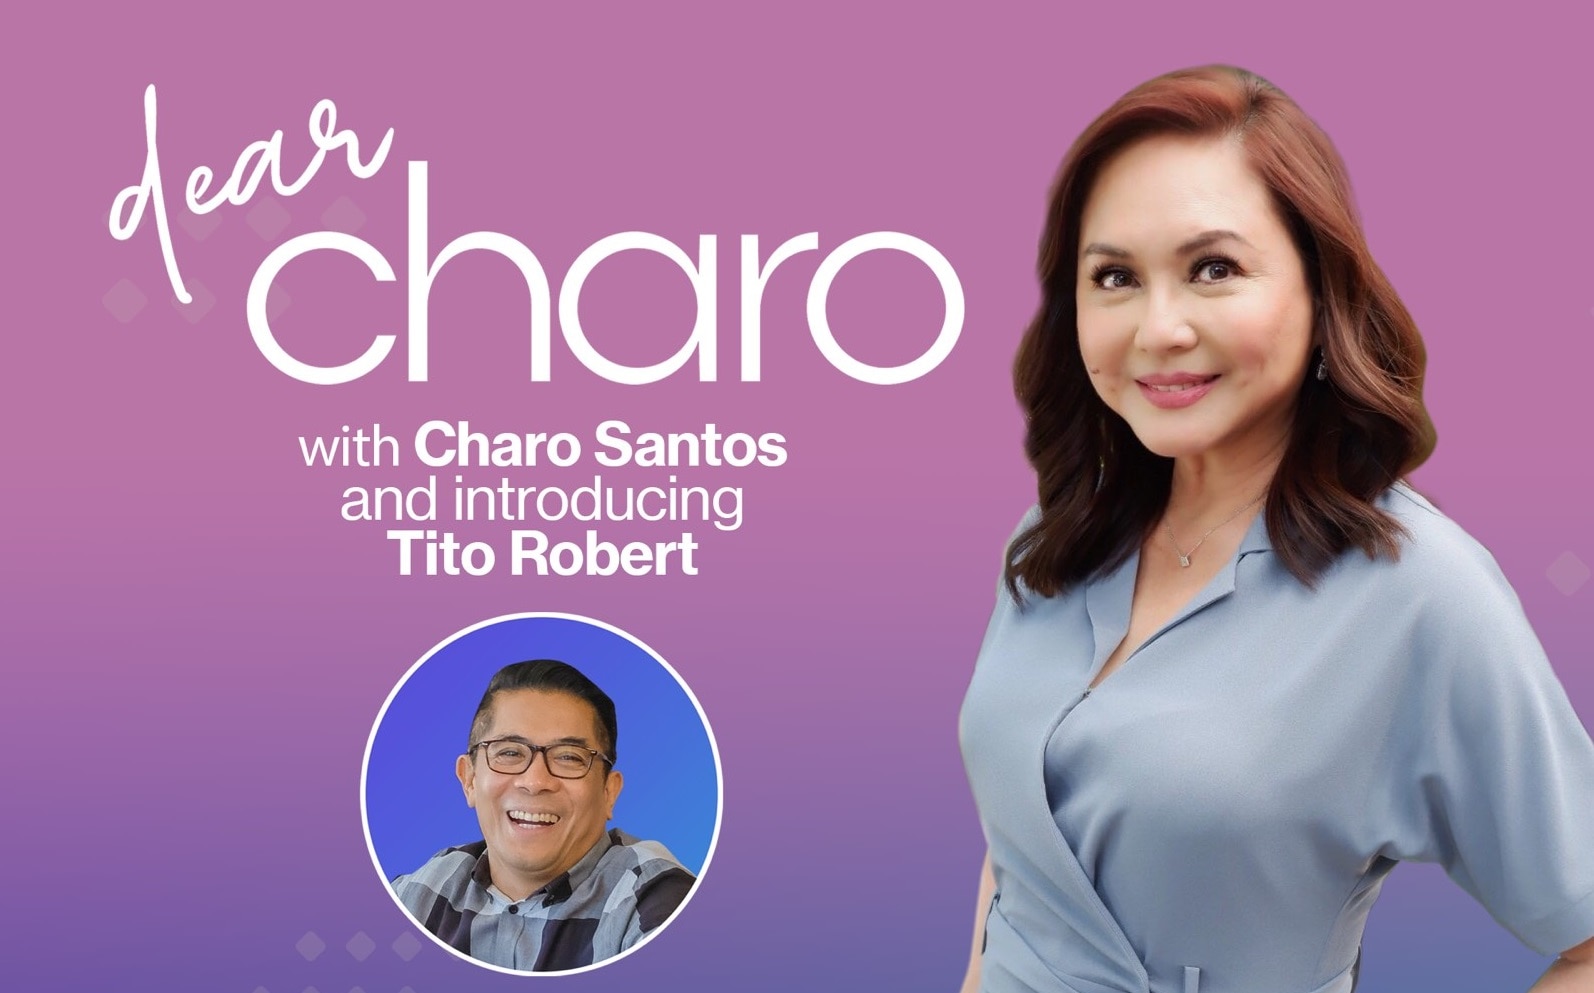 Charo leads inspiring conversations in new FYE show "Dear Charo"